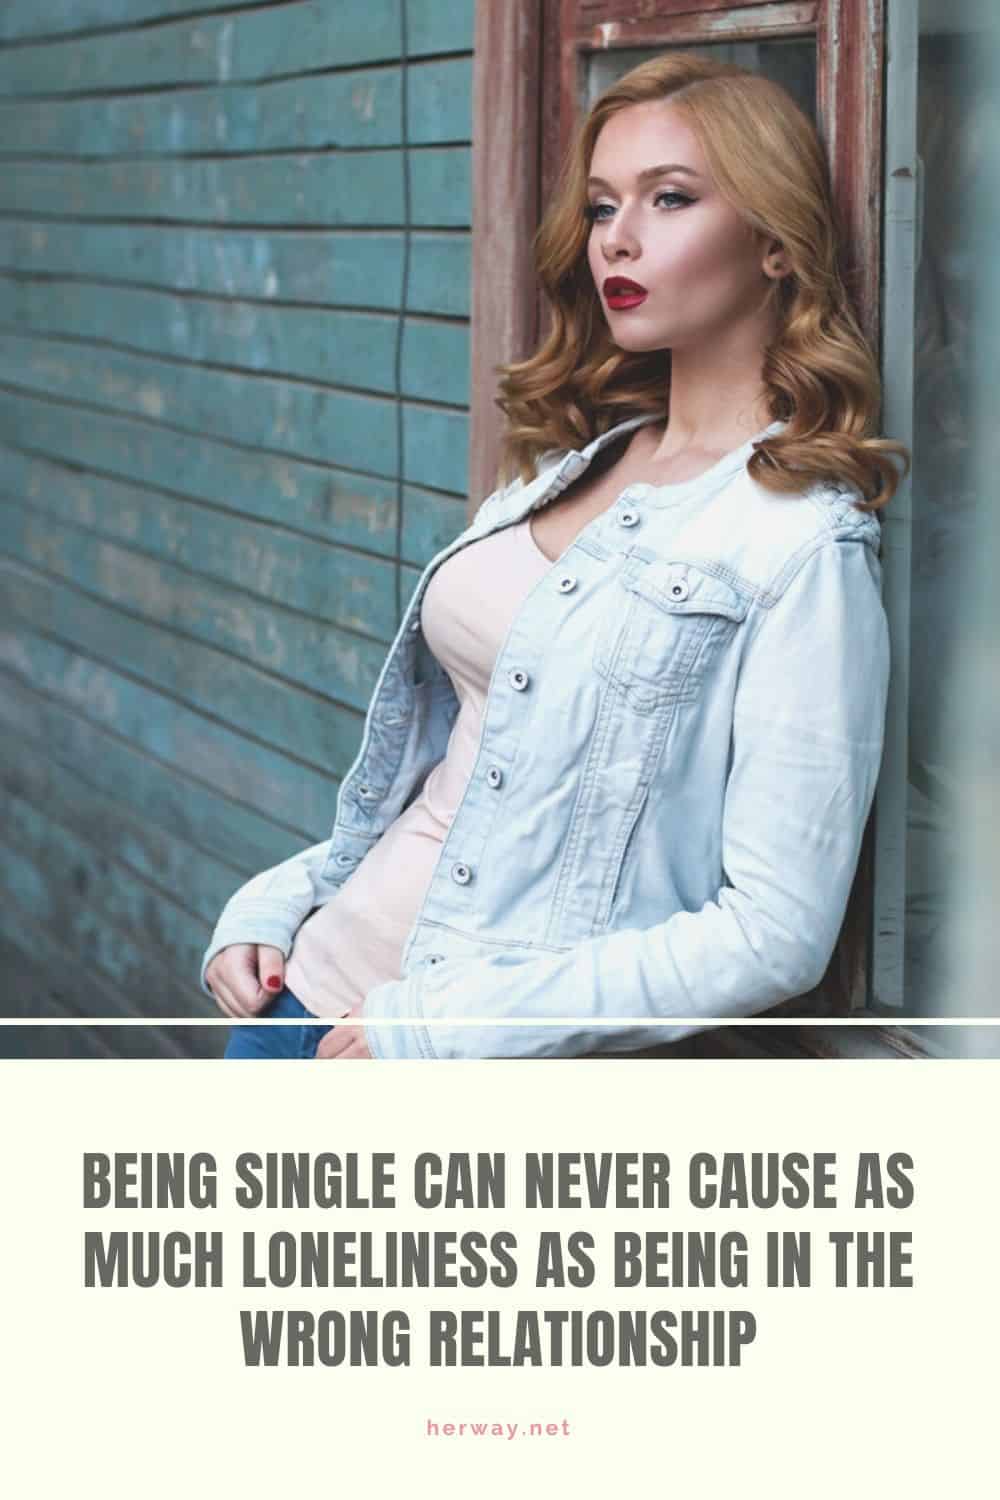 Being Single Can Never Cause As Much Loneliness As Being In The Wrong Relationship